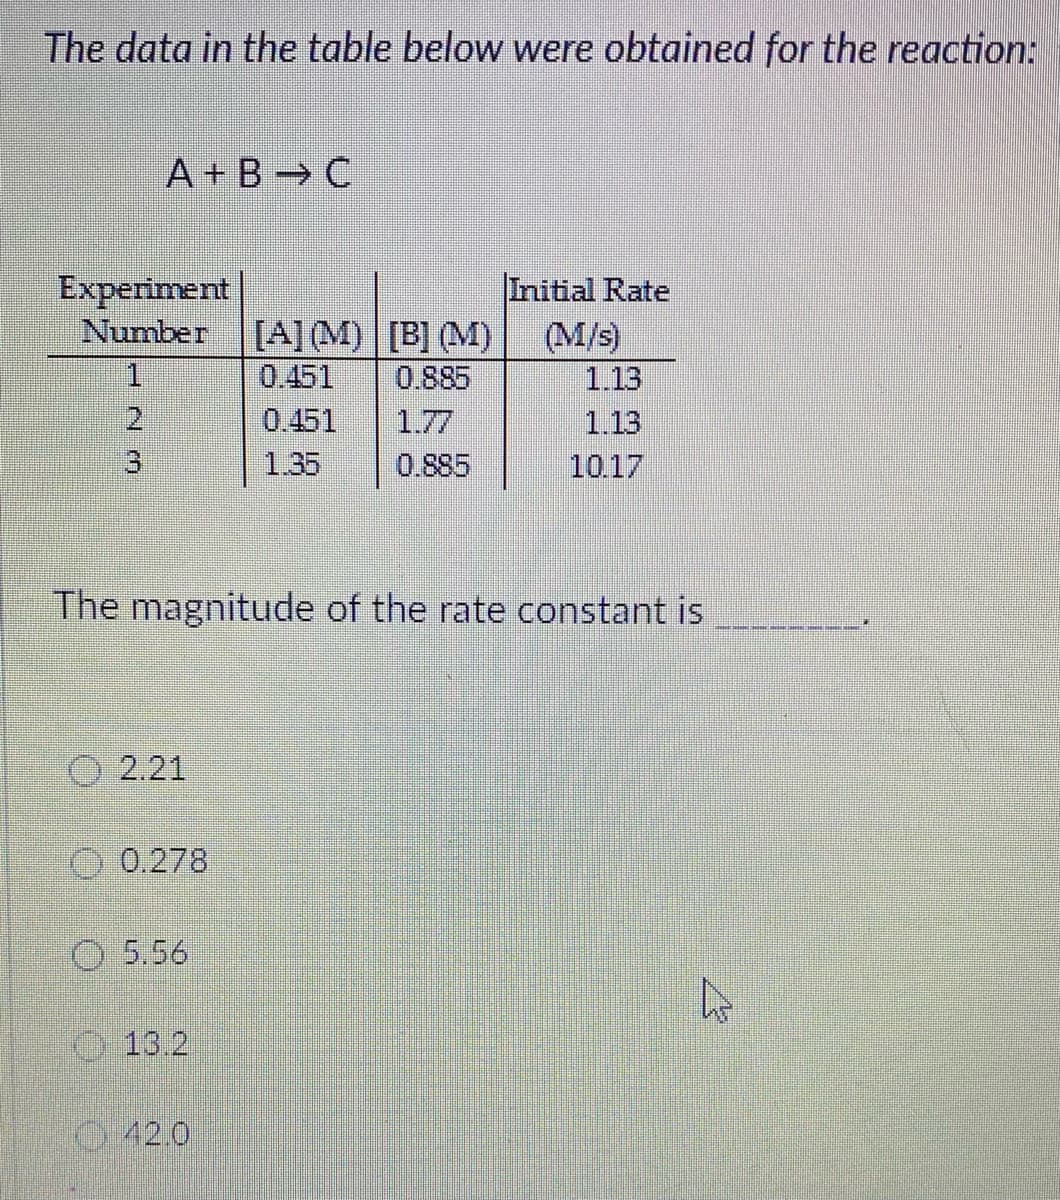 The data in the table below were obtained for the reaction:
A+B C
Experiment
Number [A](M) | [B] (M)
Initial Rate
(M/s)
0.451
0.885
1.13
2)
0.451
1.77
1.13
1.35
0.885
10.17
The magnitude of the rate constant is
O 2.21
O 0.278
O 5.56
13.2
O 42.0
